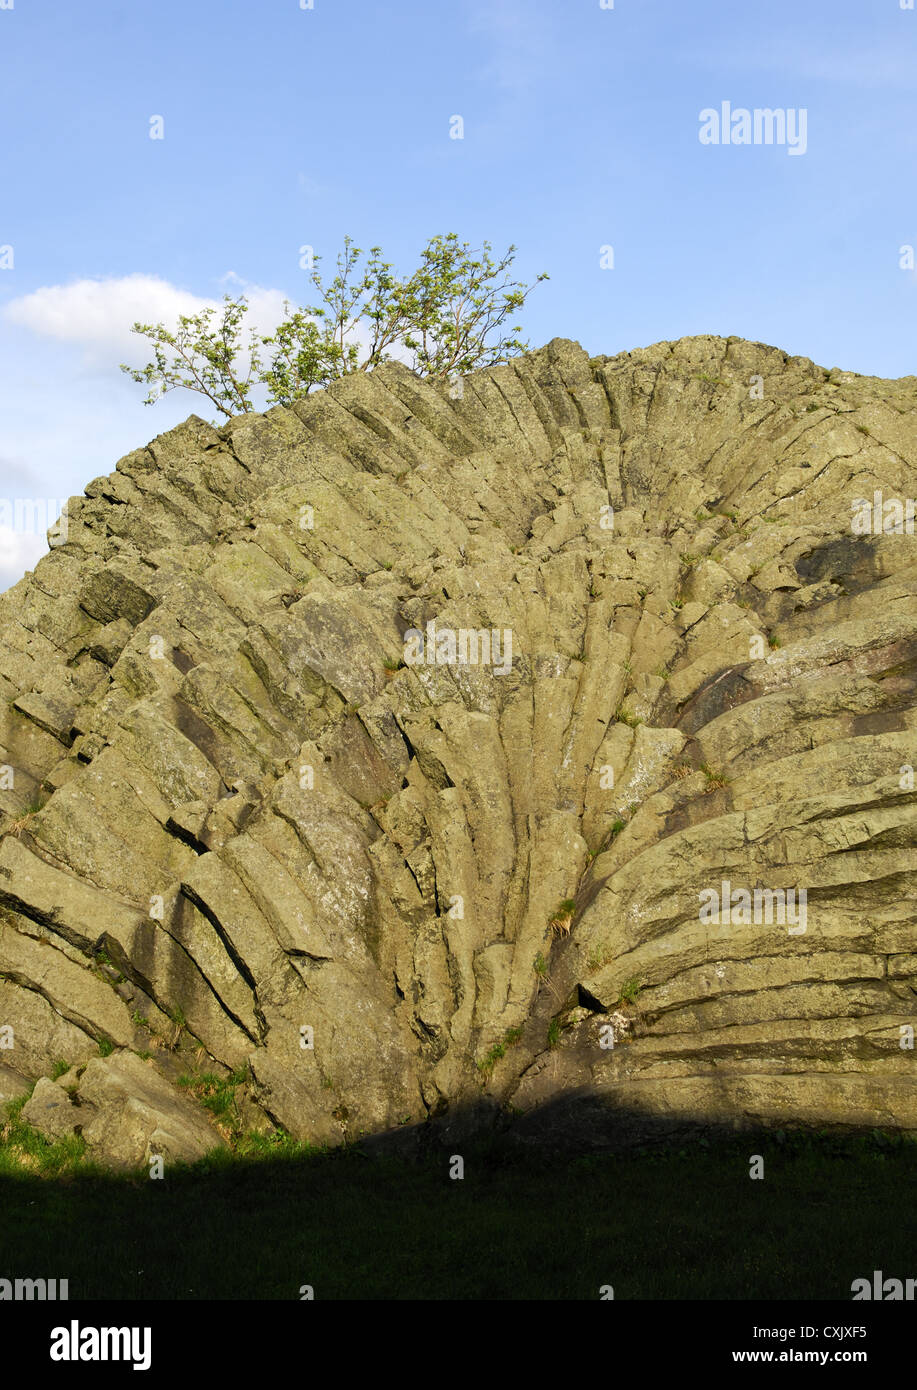 Geotope Palm frond, basalt outcrop, Germany Stock Photo